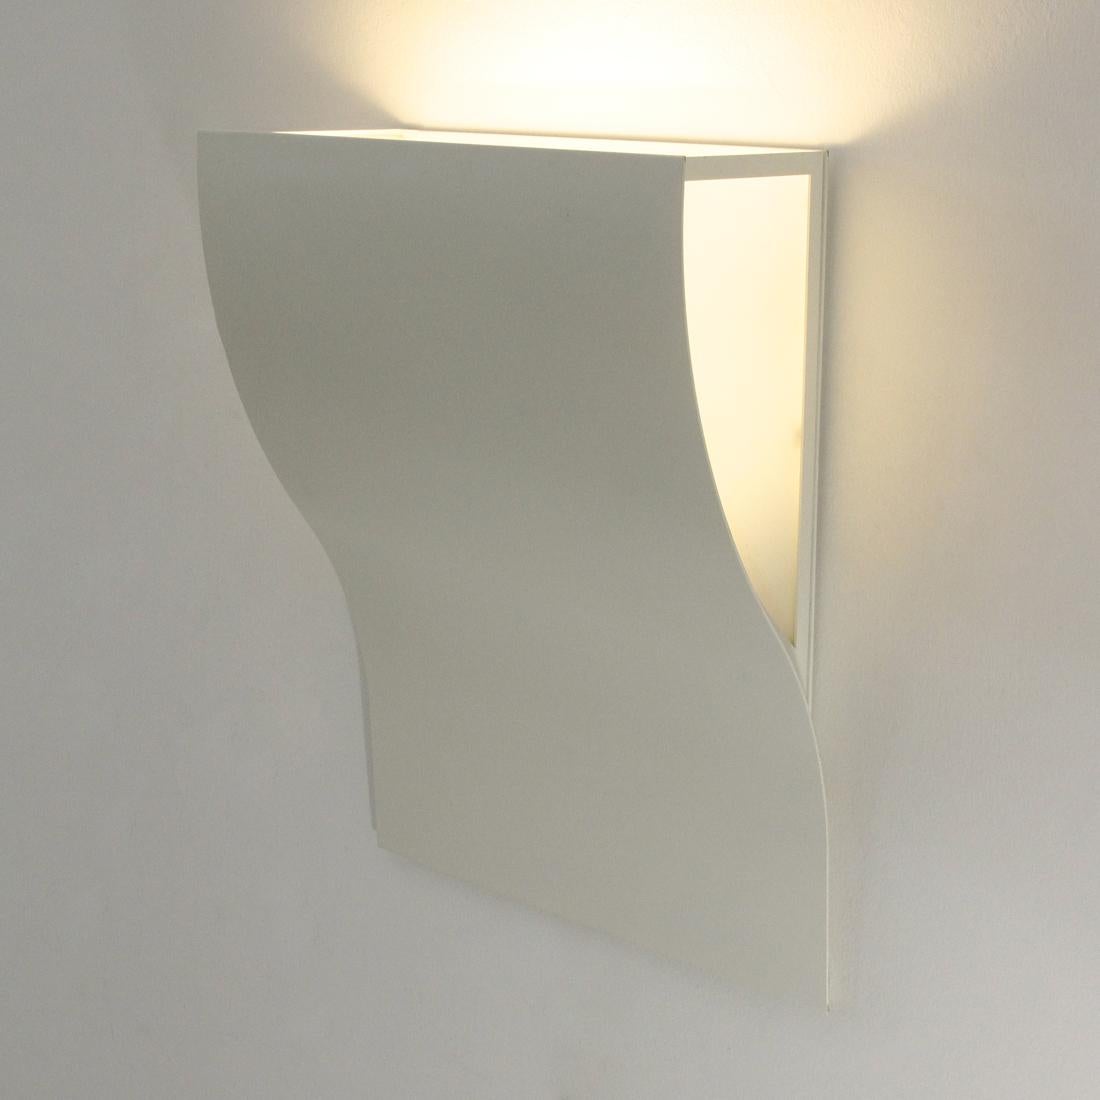 Metal 'Moki' wall lamp by Eugenio and Andrea Pamio for Oty Light, 2000s For Sale